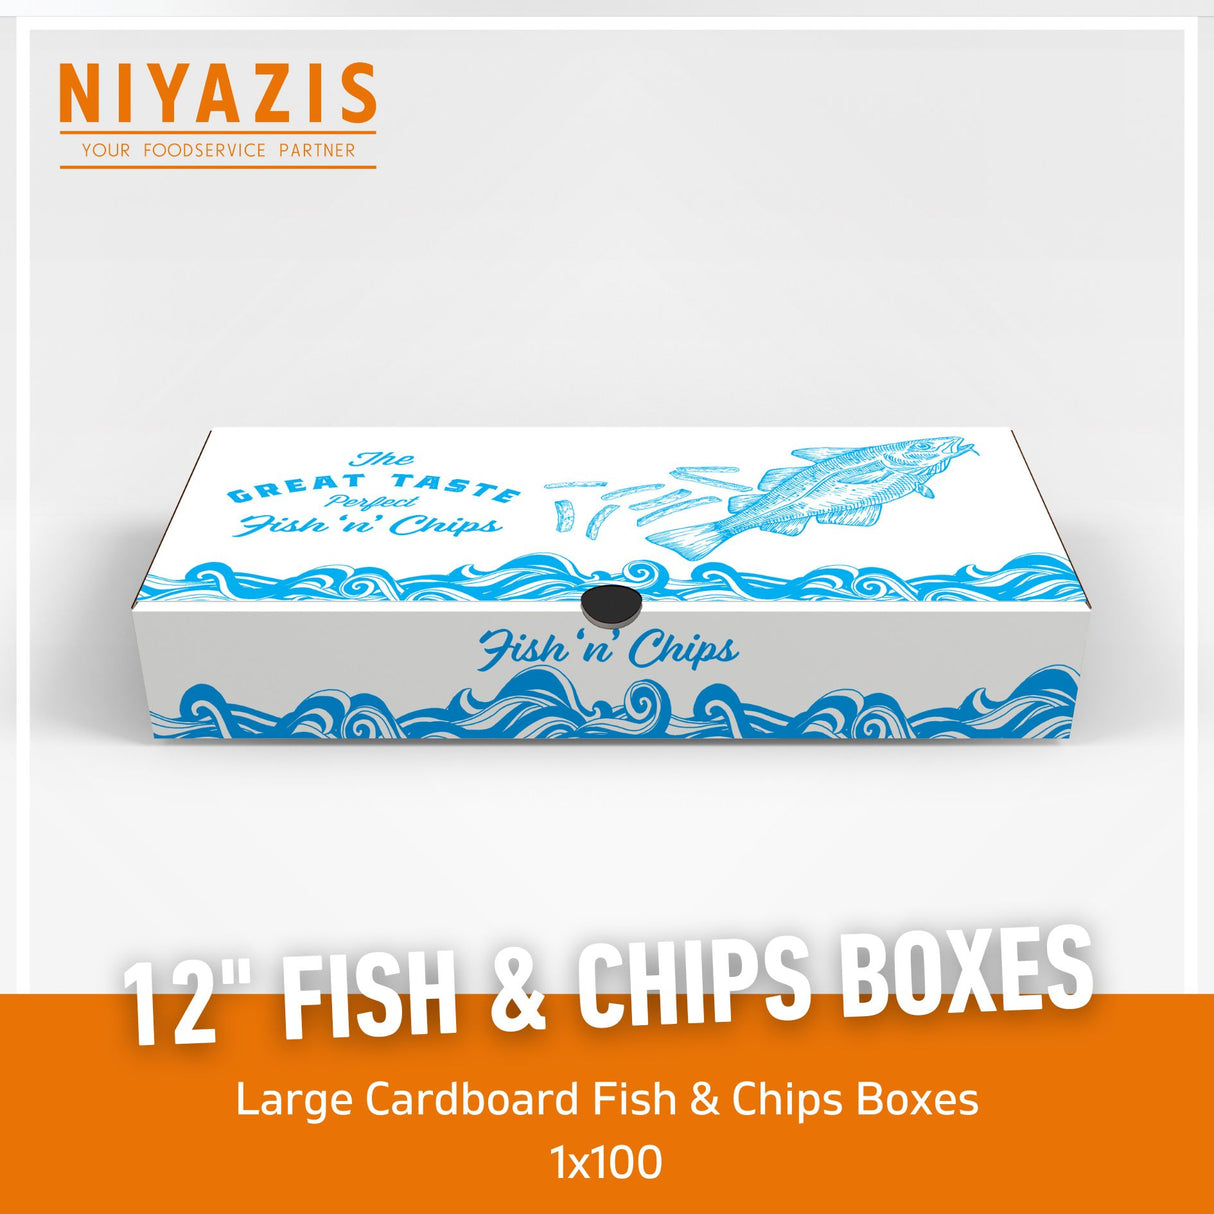 12" Printed The Great Taste Fish & Chips Boxes 1X100